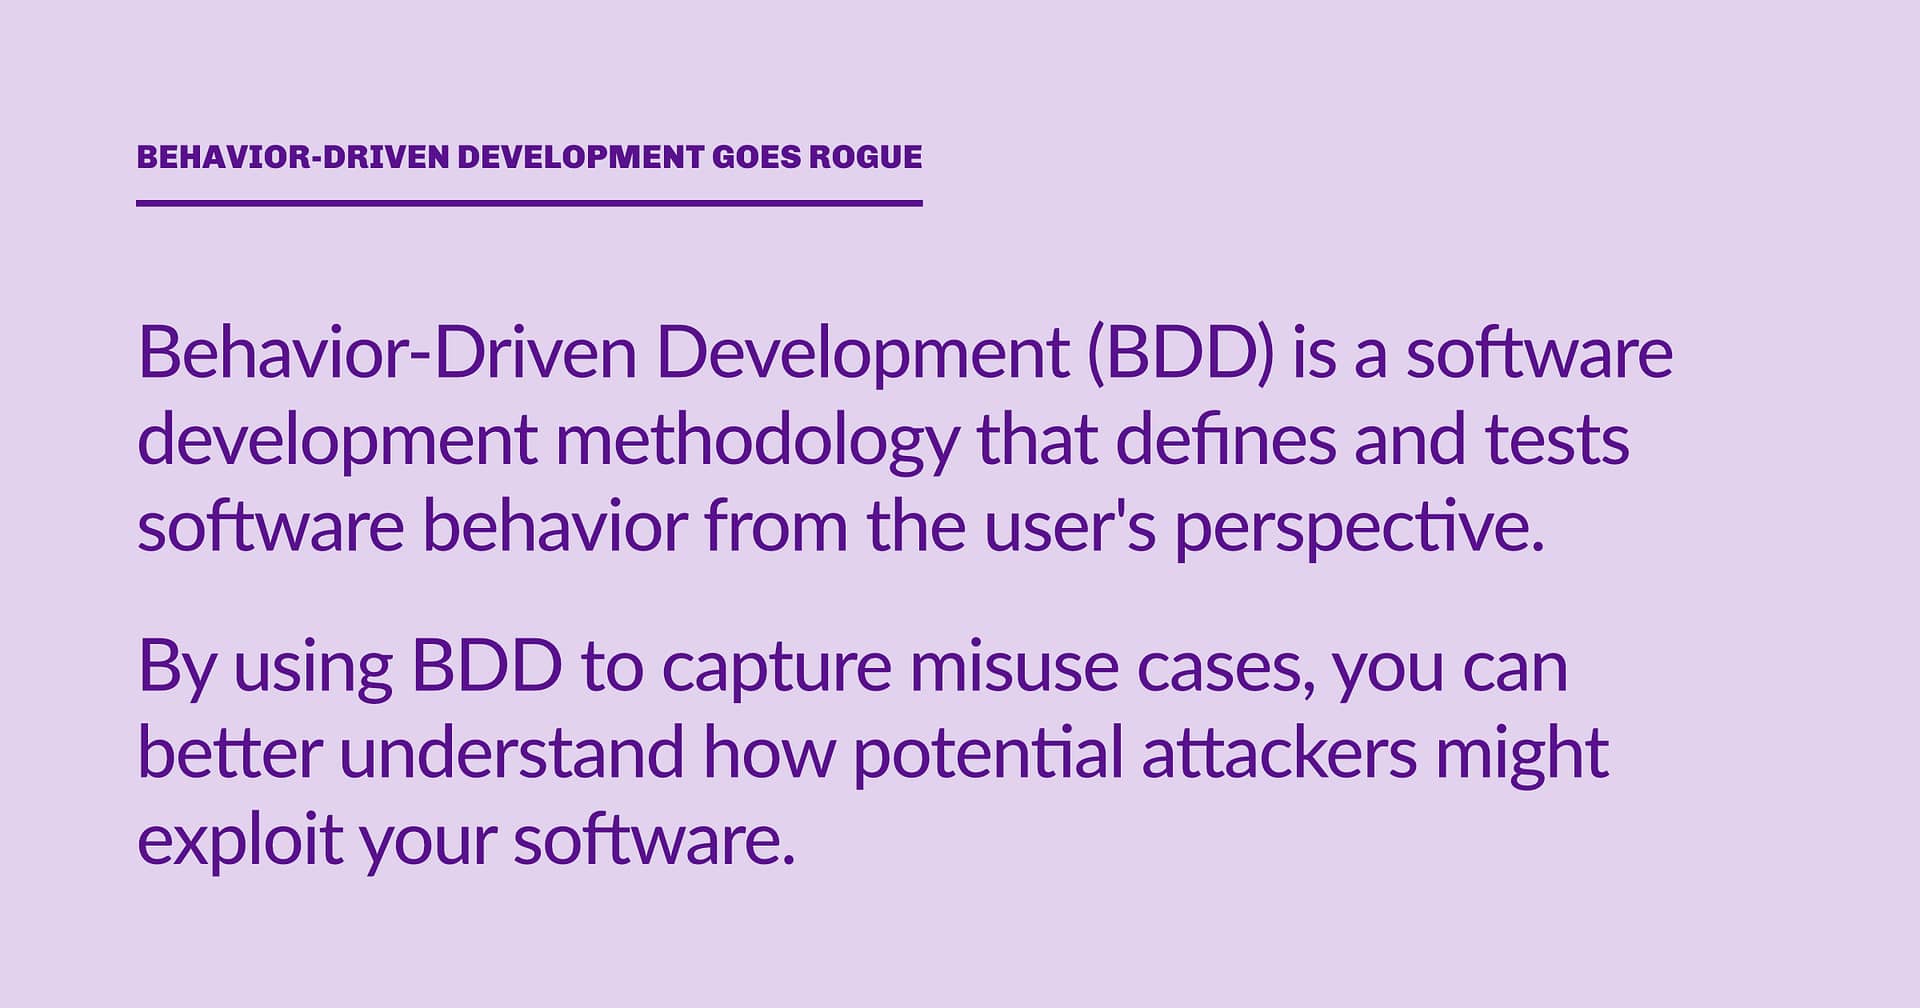 Highlight block: Behavior-Driven Development (BDD) is a software development methodology that defines and tests software behavior from the user's perspective. By using BDD to capture misuse cases, you can better understand how potential attackers might exploit your software.